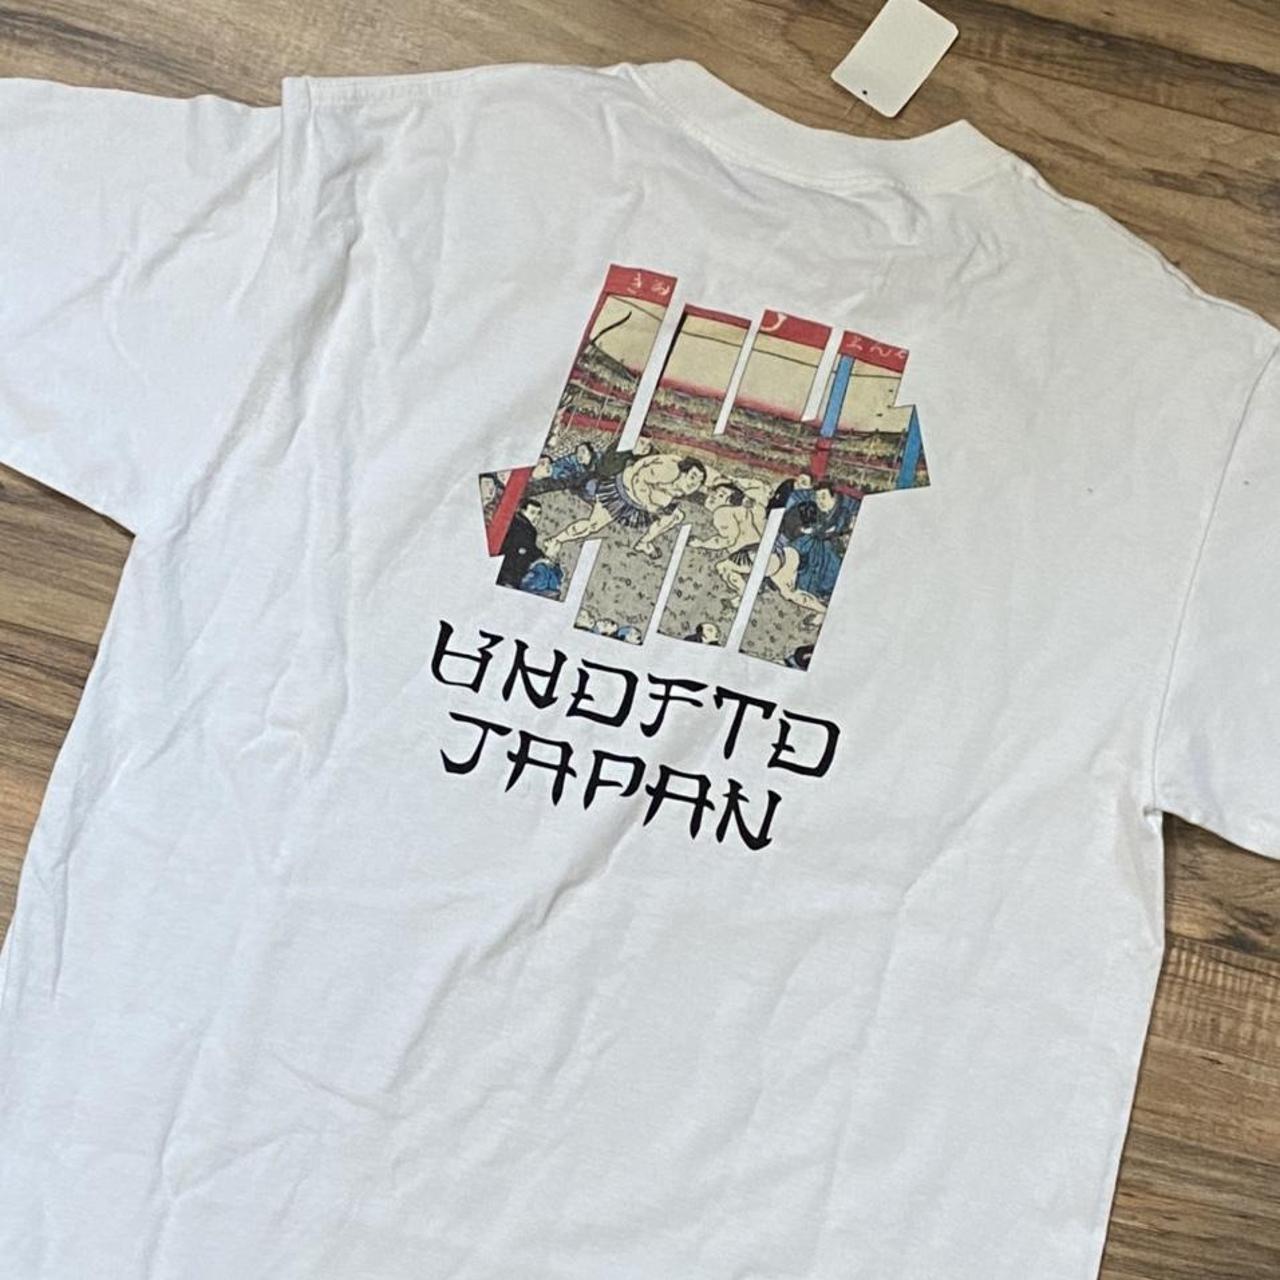 Product Image 2 - UNDFTD Japan Tee Shirt DS